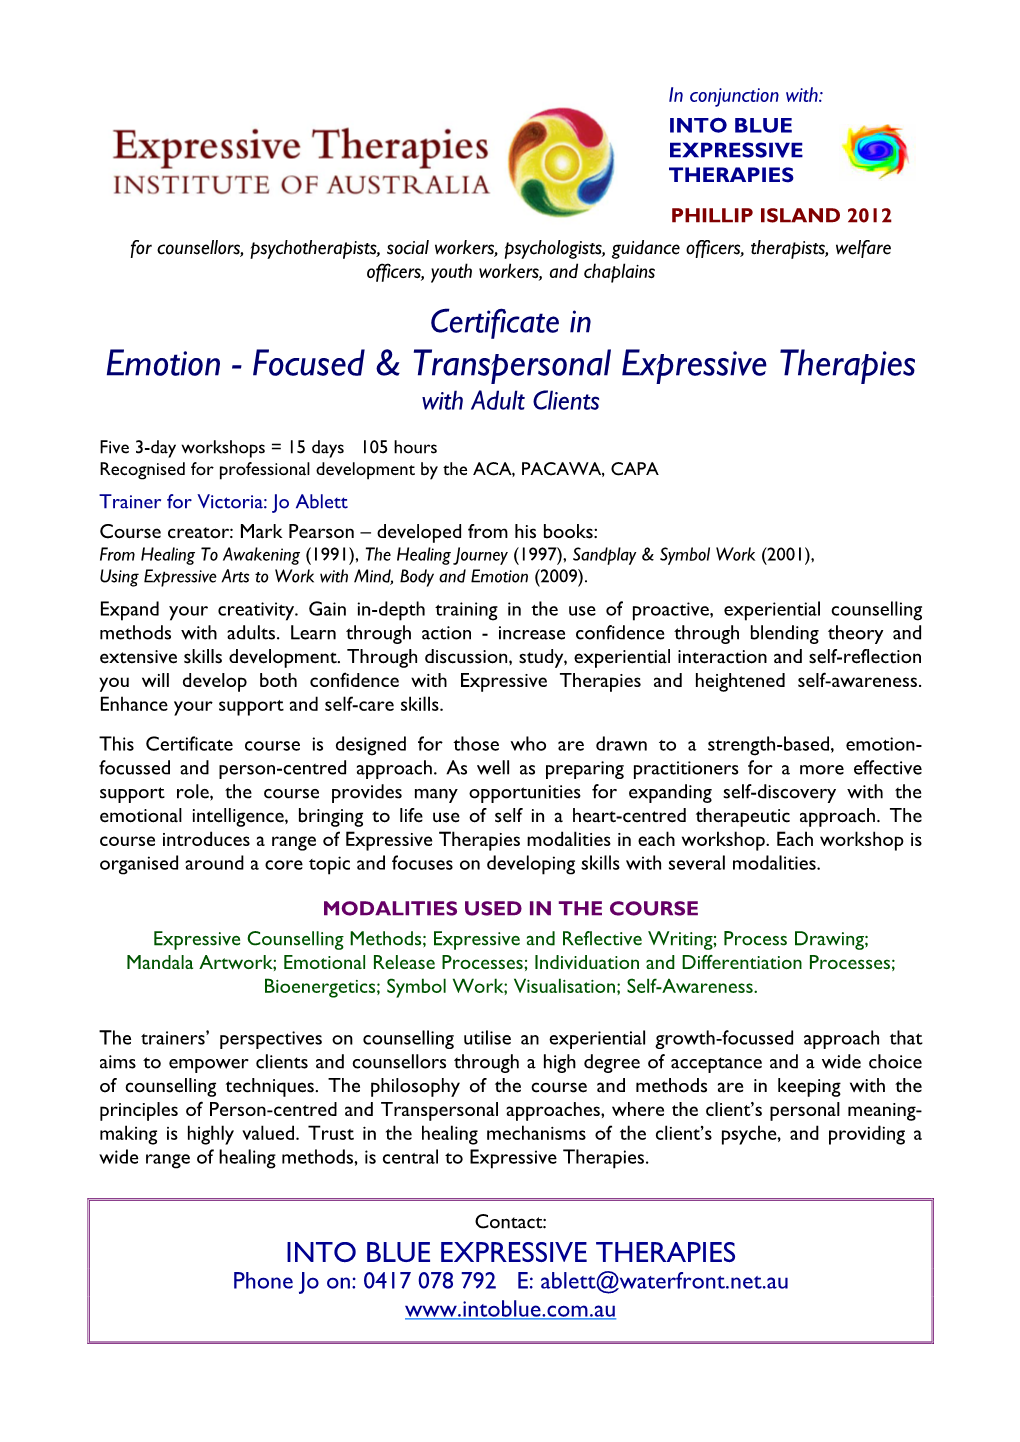 Emotion - Focused & Transpersonal Expressive Therapies with Adult Clients